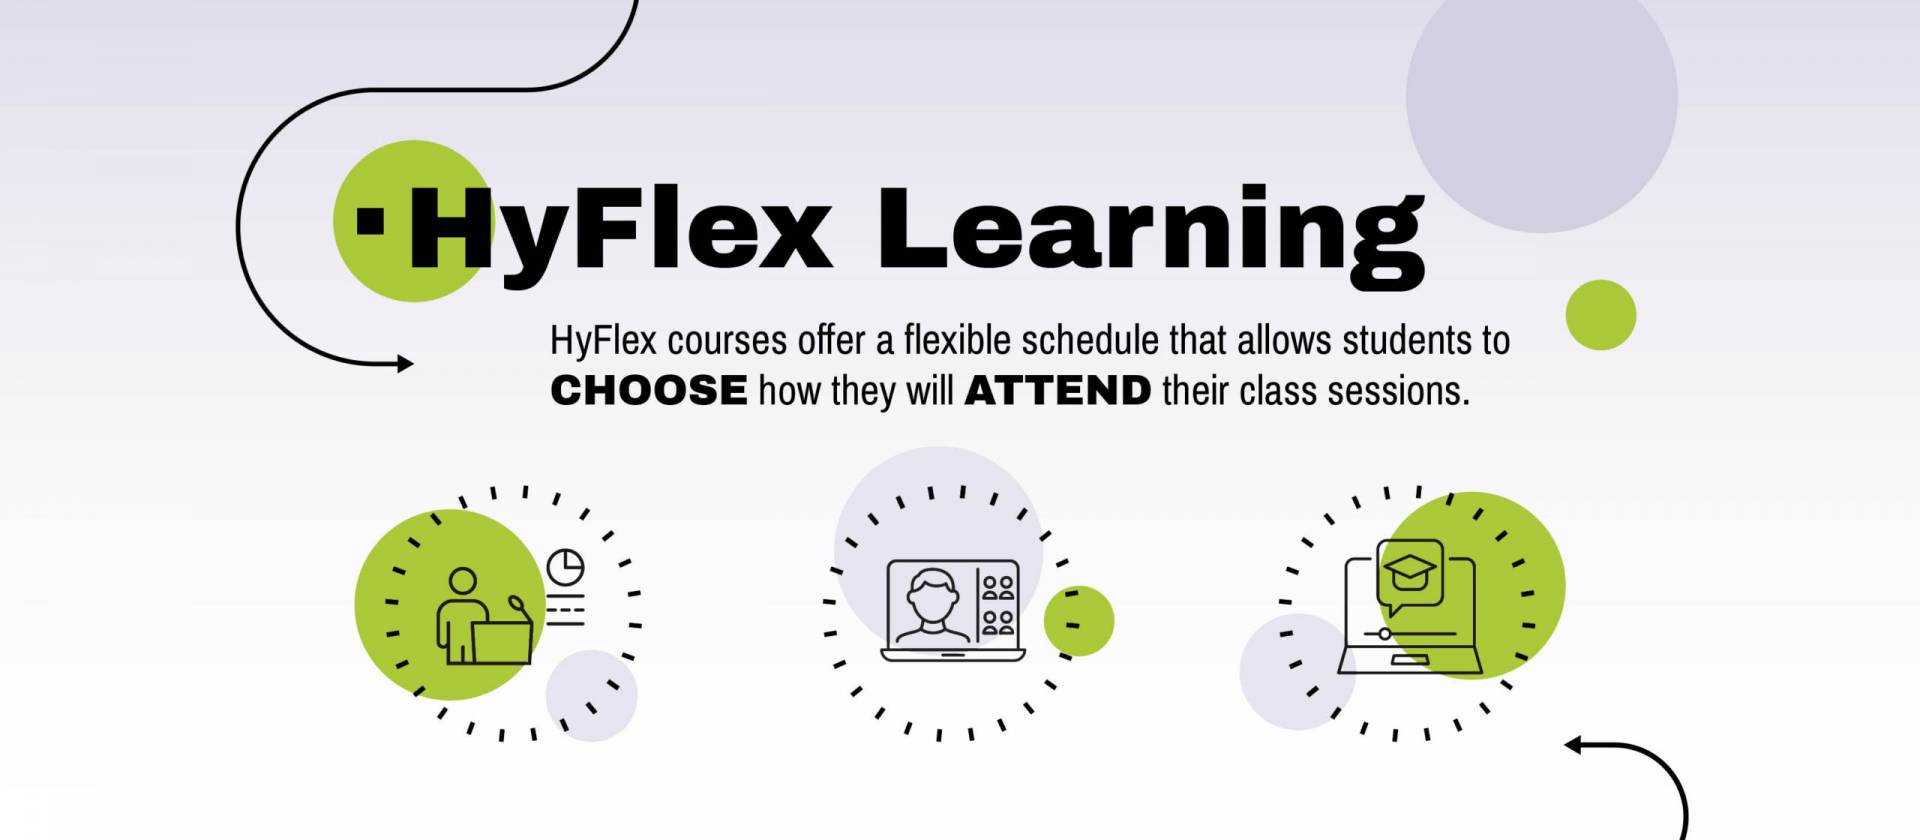 HyFlex Learning: HyFlex courses offer a flexible schedule that allows students to choose how they will ATTEND their class sessions.